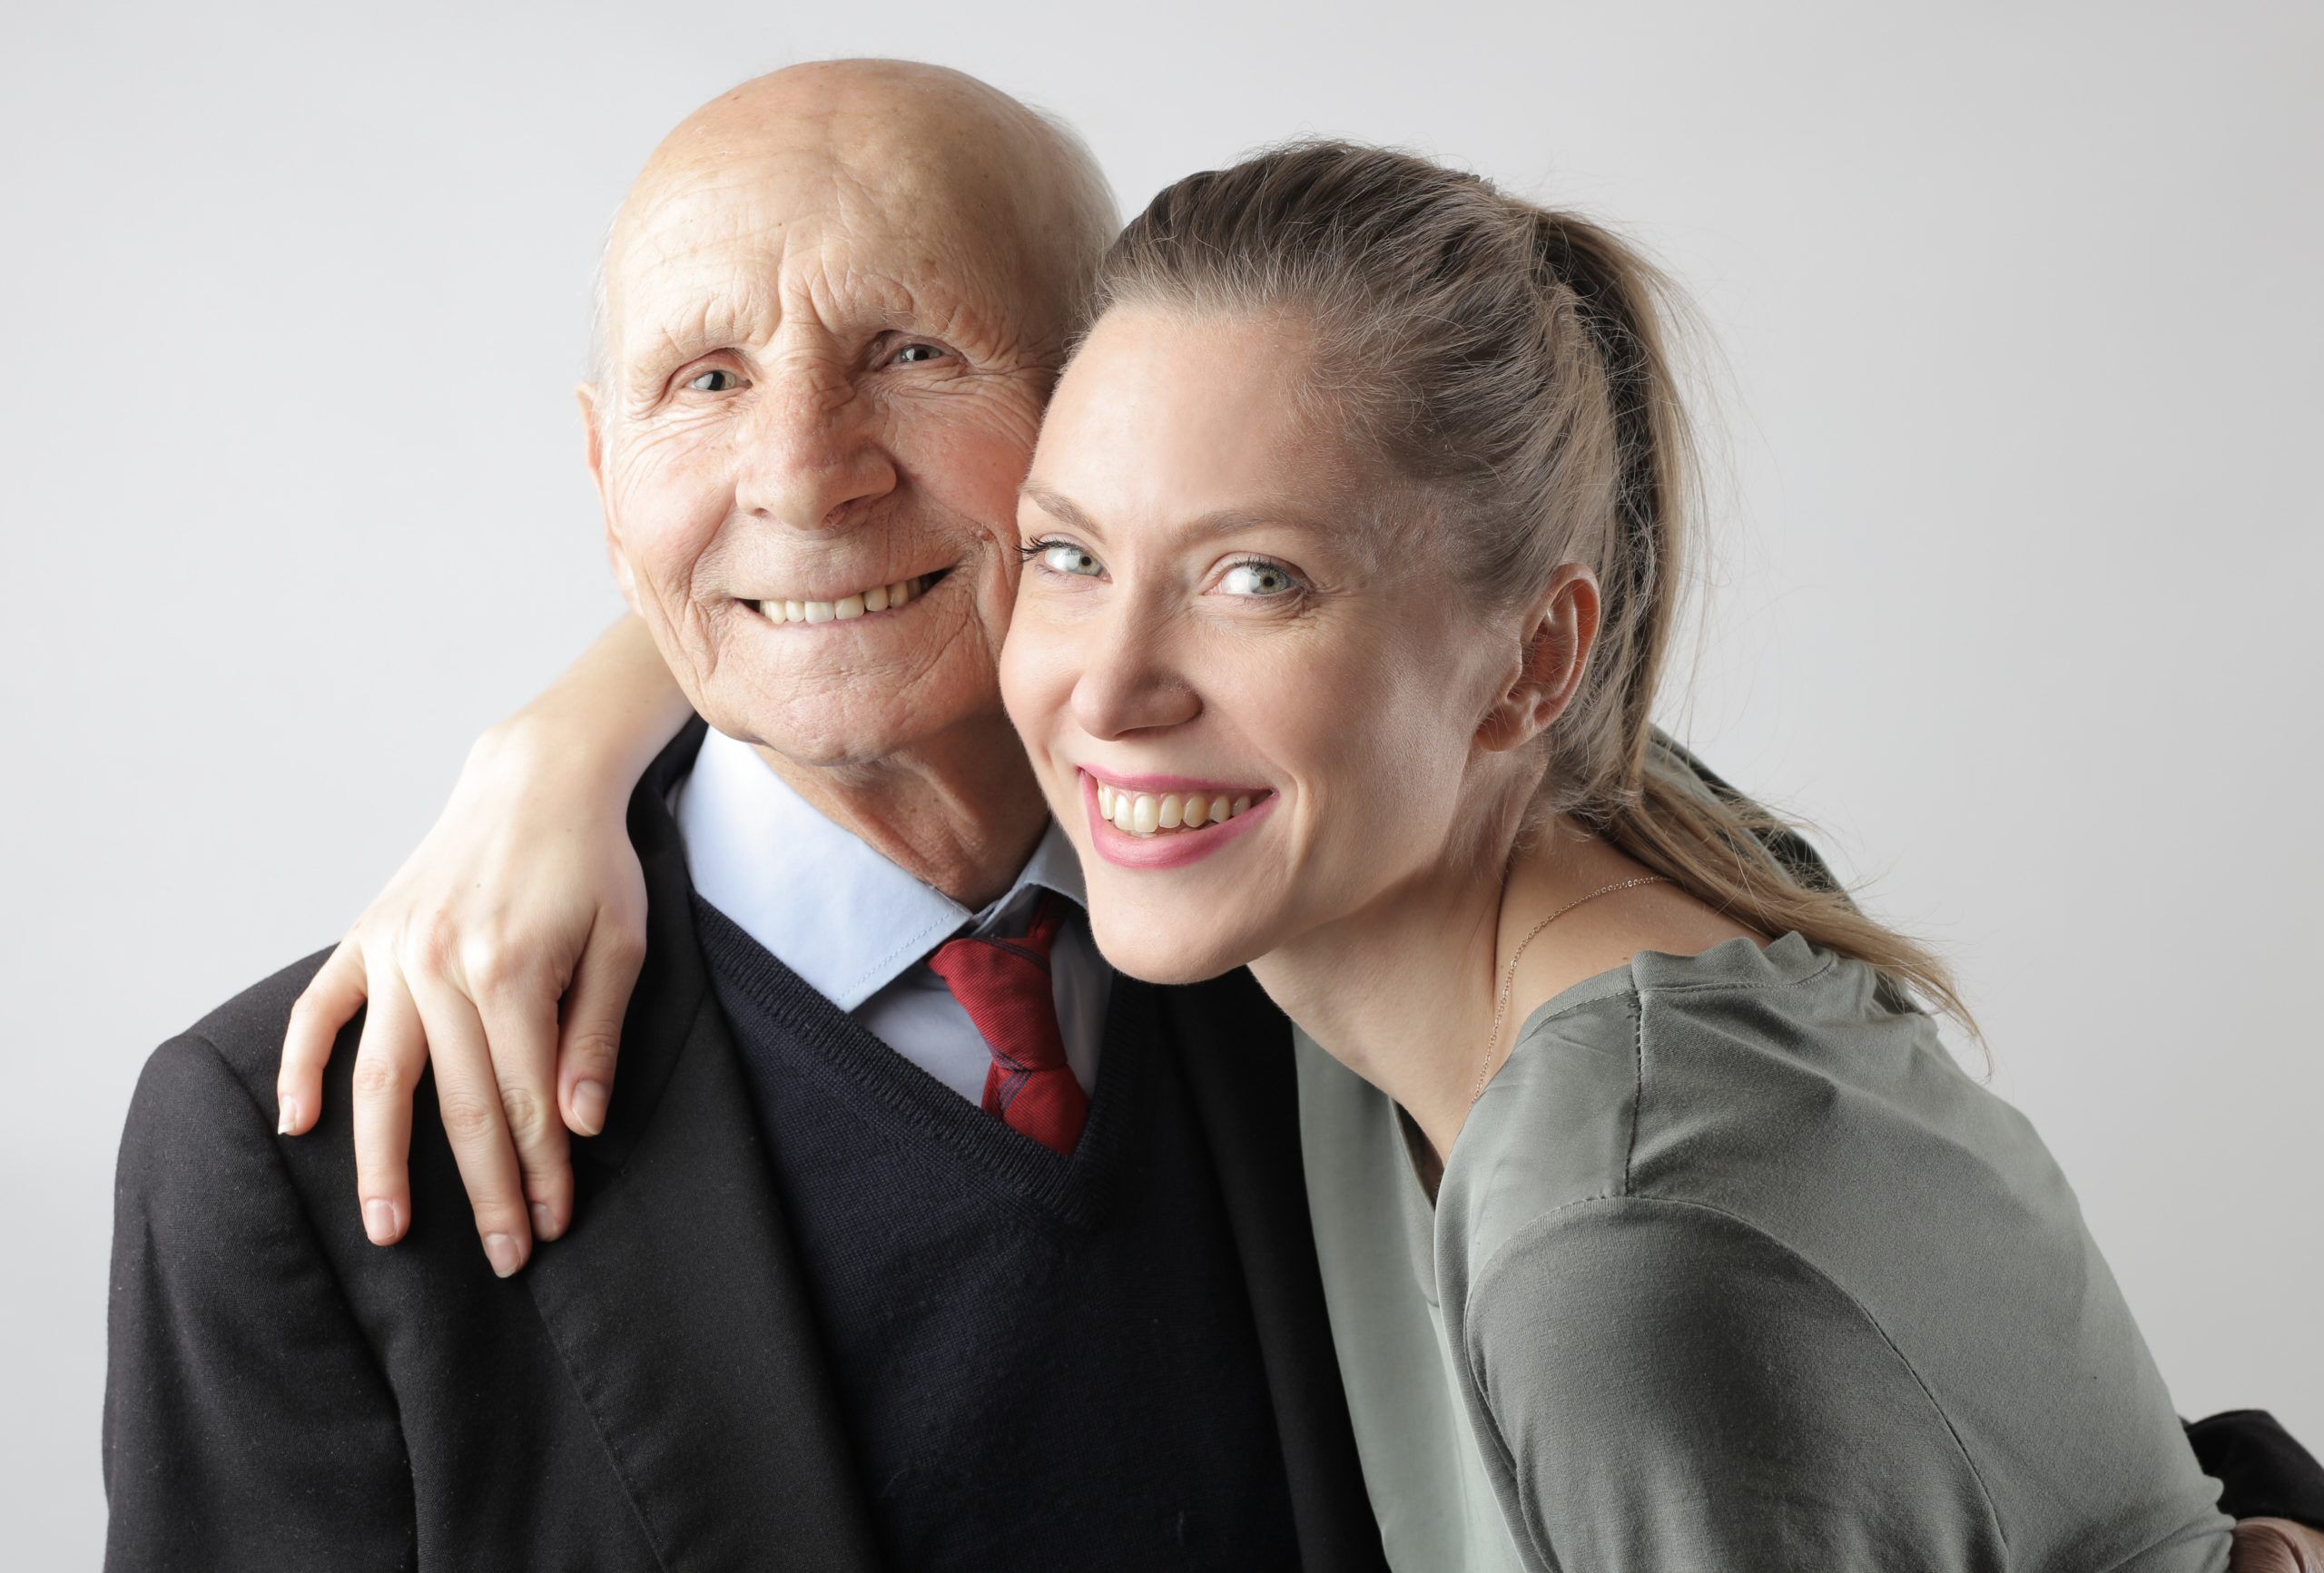 young woman and older man